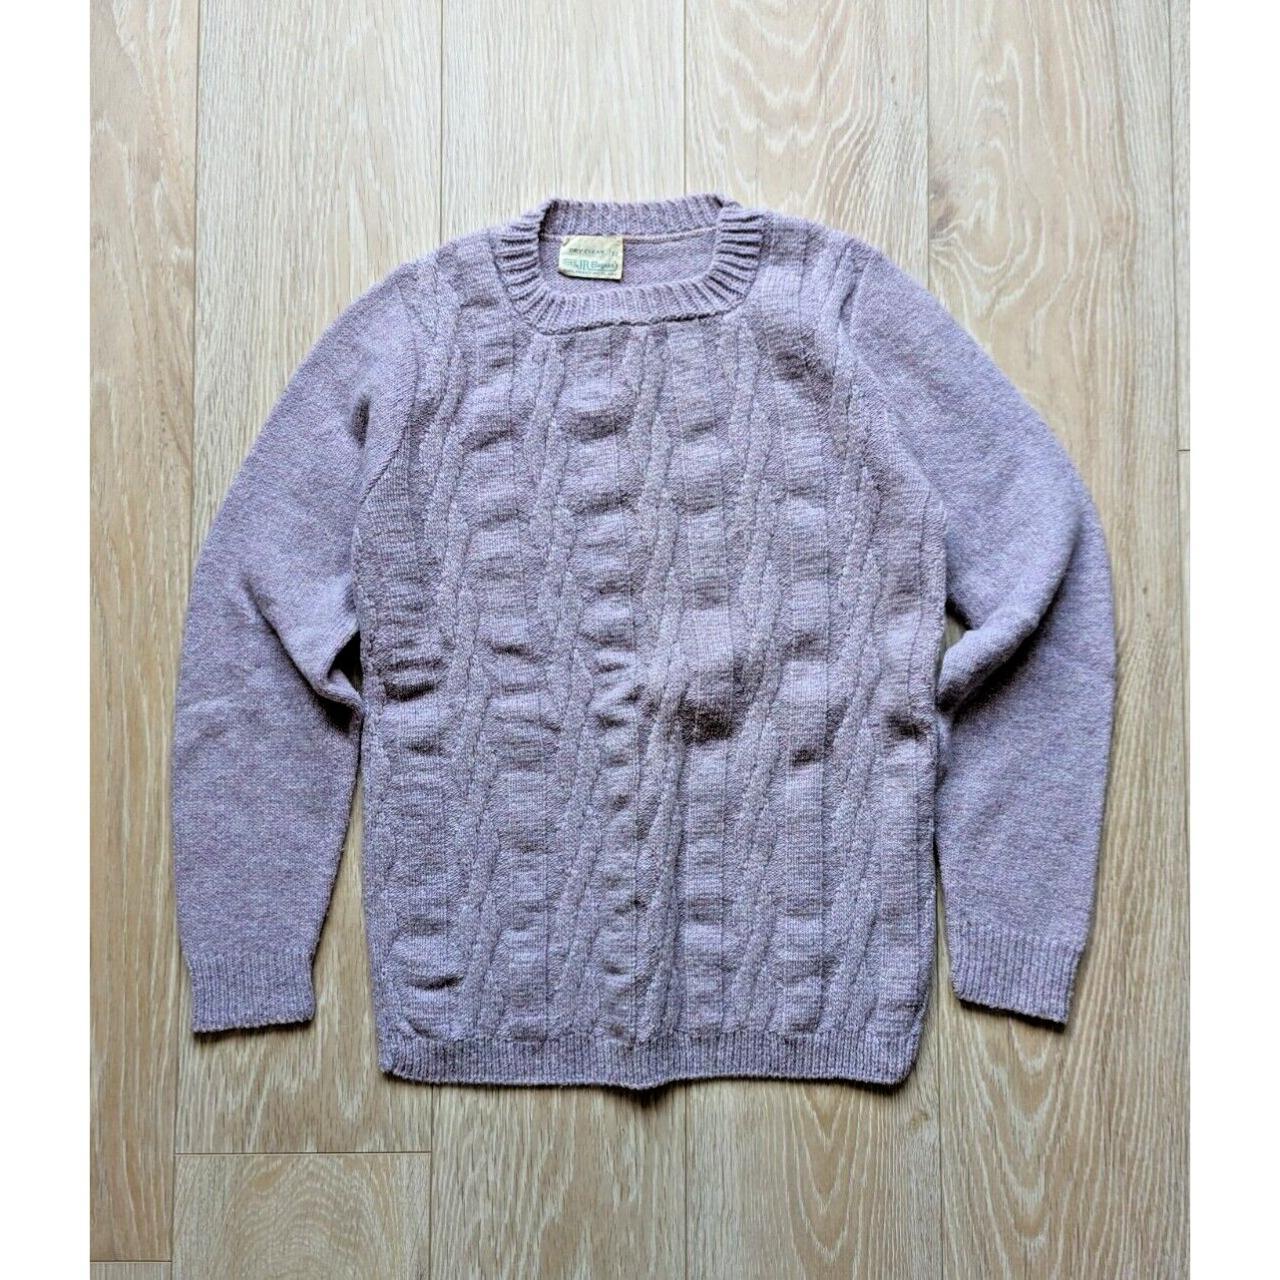 Sears Vintage 70s Lavender Chunky Cable Knit Wool... - Depop